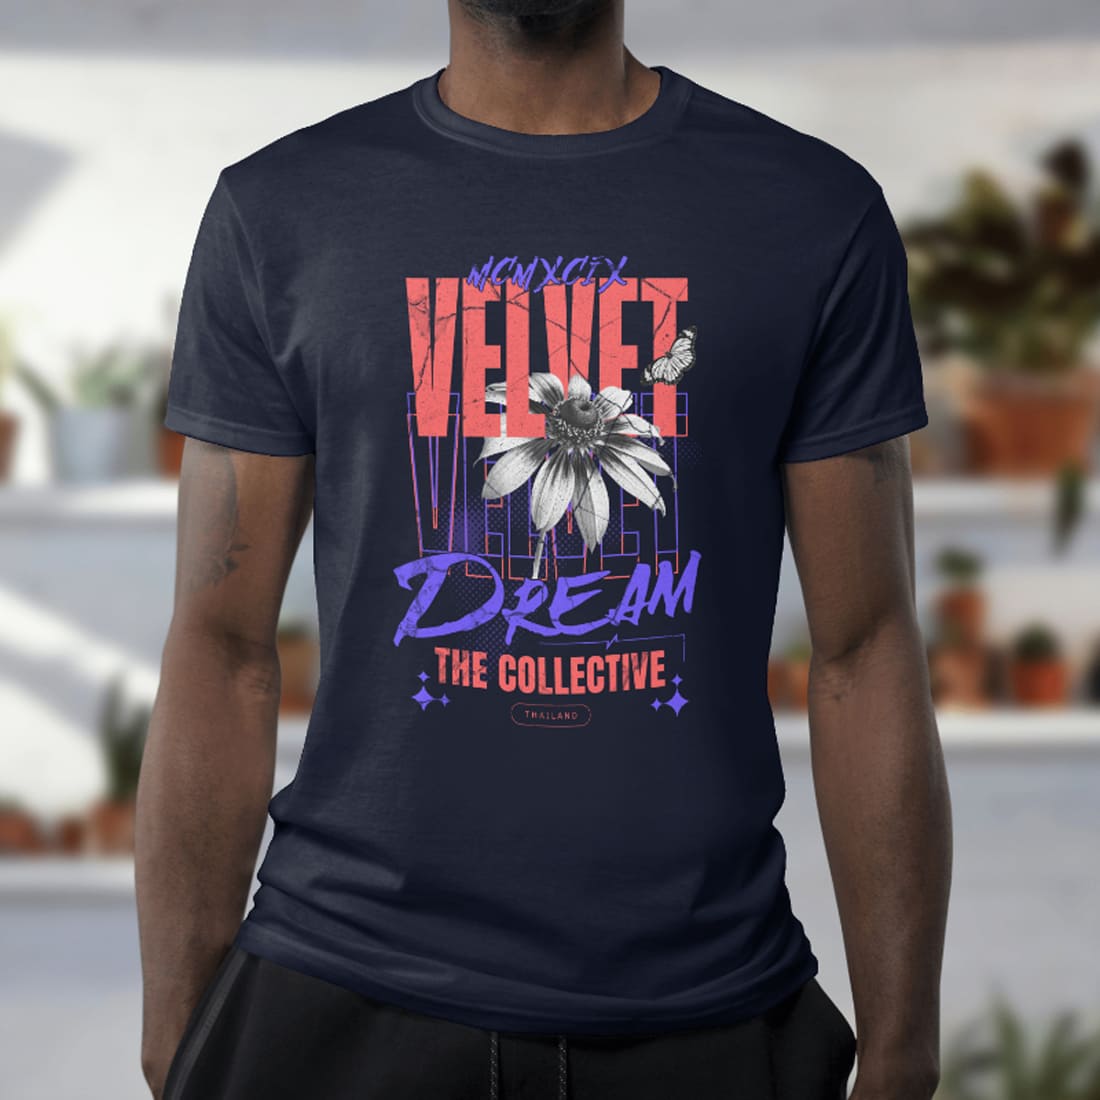 MOMXCIX VELVET DREAM THE COLLECTIVE – Quotes T-Shirt Design cover image.